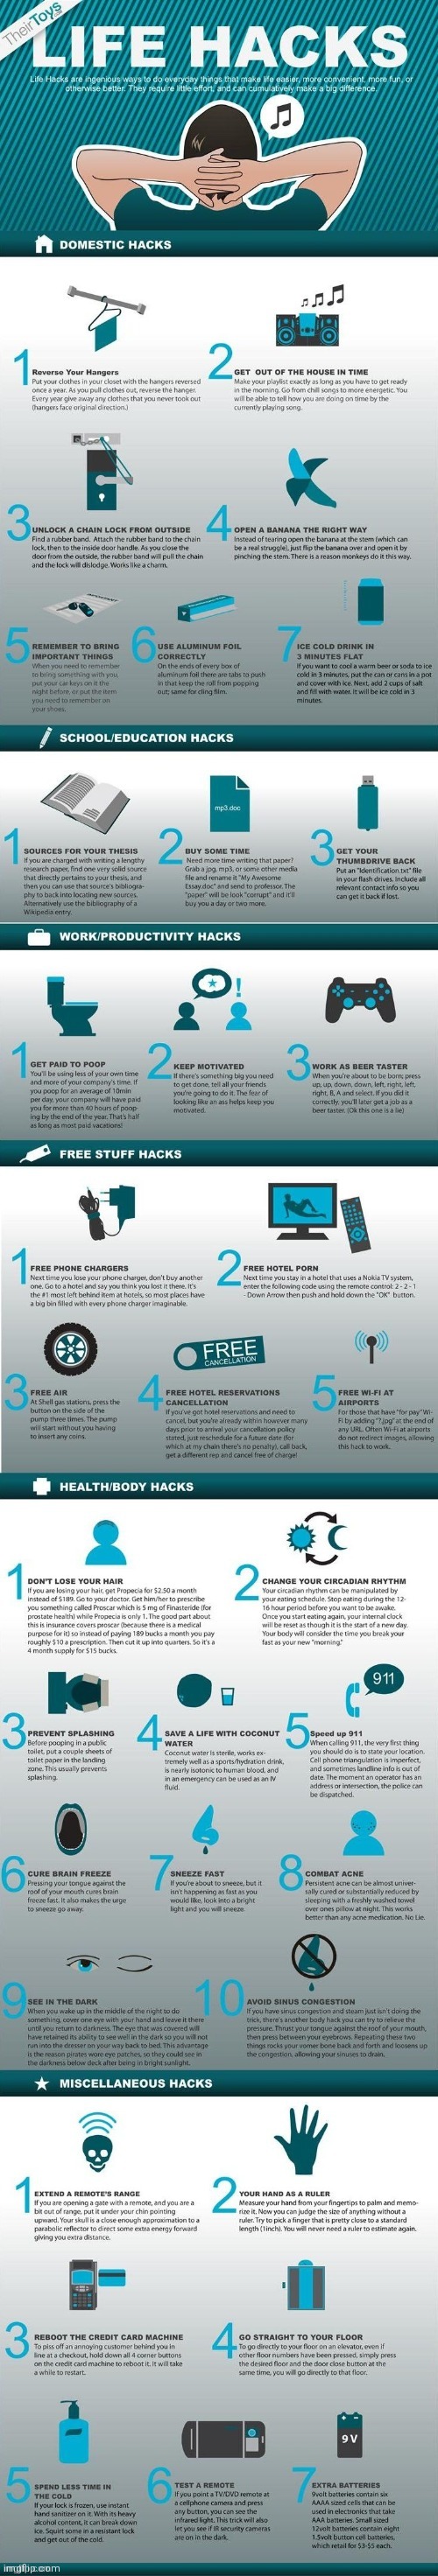 LIFE-HACKS INFOGRAPHIC (Found By SimoTheFinlandized - Not Mine - Repost) | image tagged in simothefinlandized,life hack,infographic,tutorial,repost | made w/ Imgflip meme maker